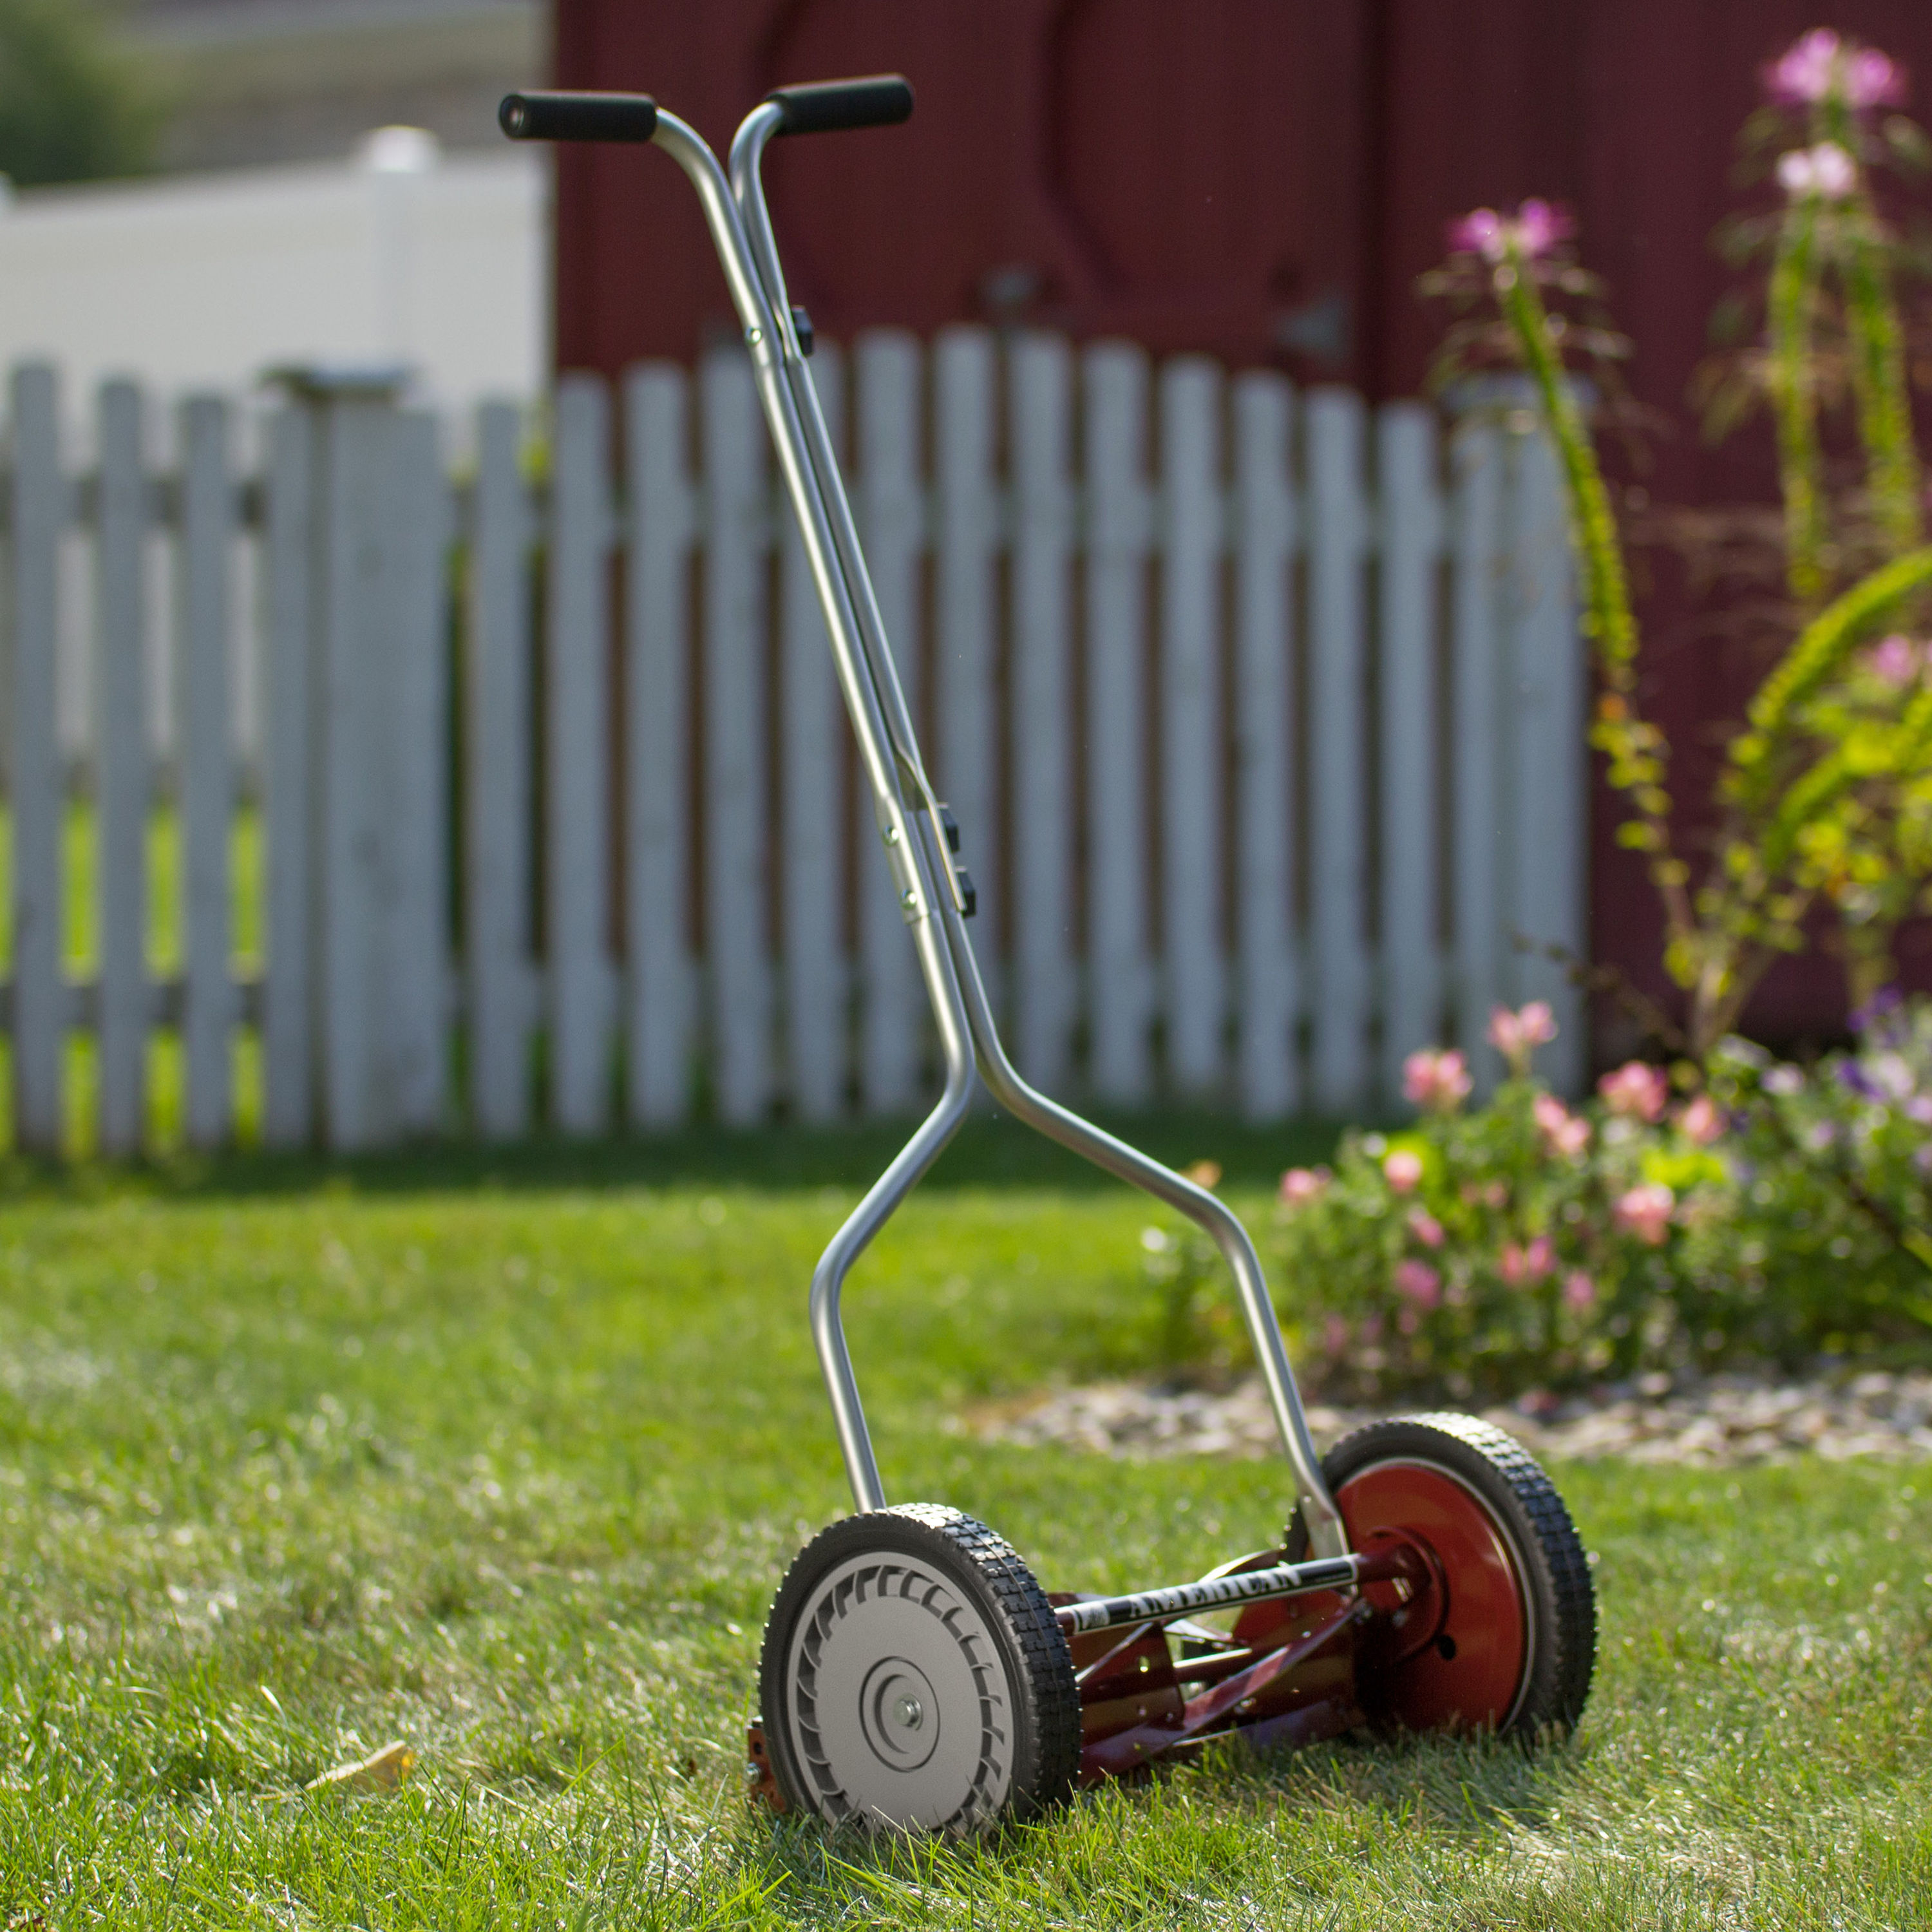 American Lawn Mower 14-Inch Reel Lawn Mower With 5-Blade, 50% OFF